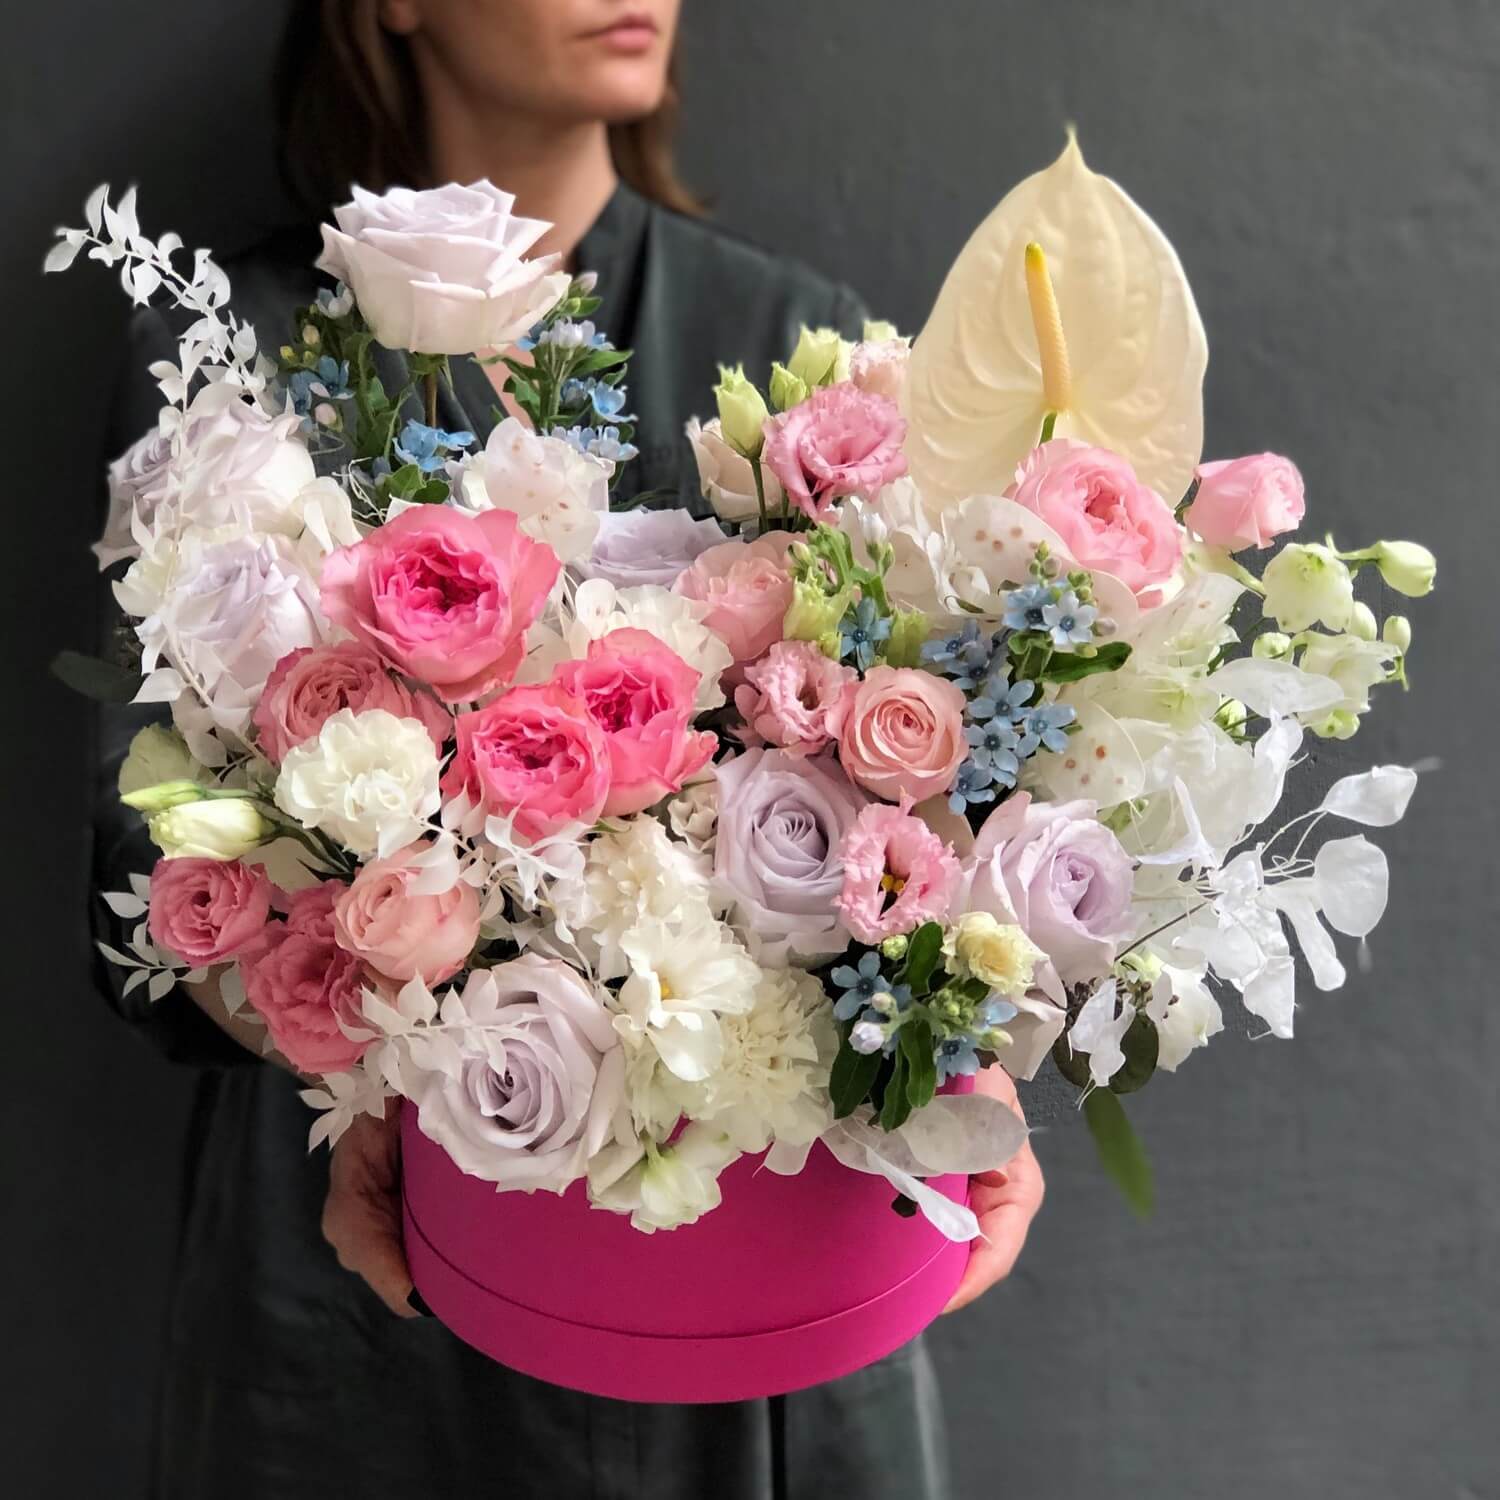 Bouquet In The Box Magic Dream Delivery To Lviv Kvitna Anthurium Hydrangea Oxypetalum Rose Pion Shaped Rose Ruscus Eustoma Pink